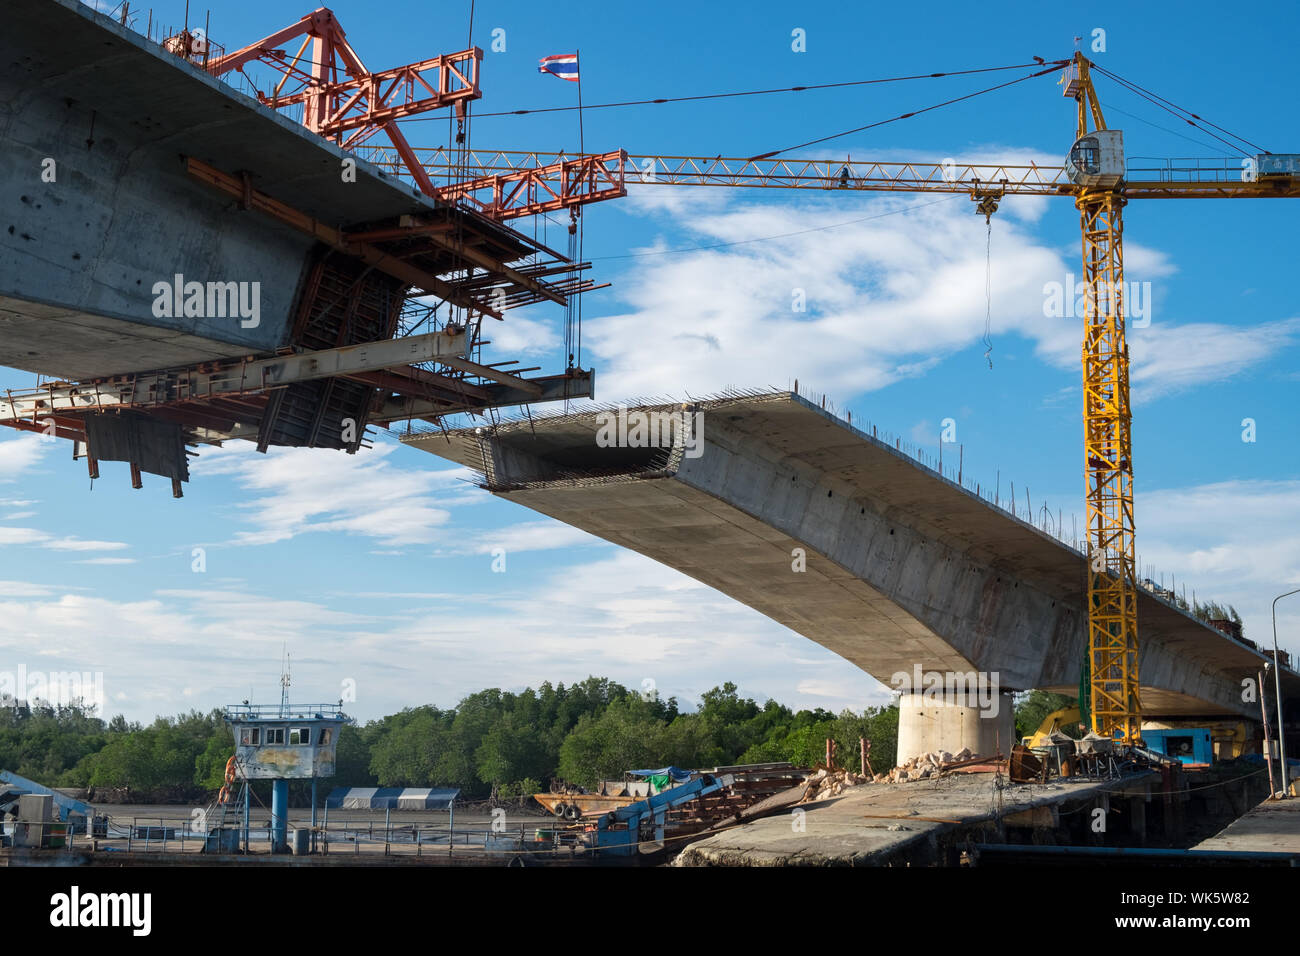 Low Angle View Of Cranes Over Bridge At Construction Site On Sunny Day Stock Photo